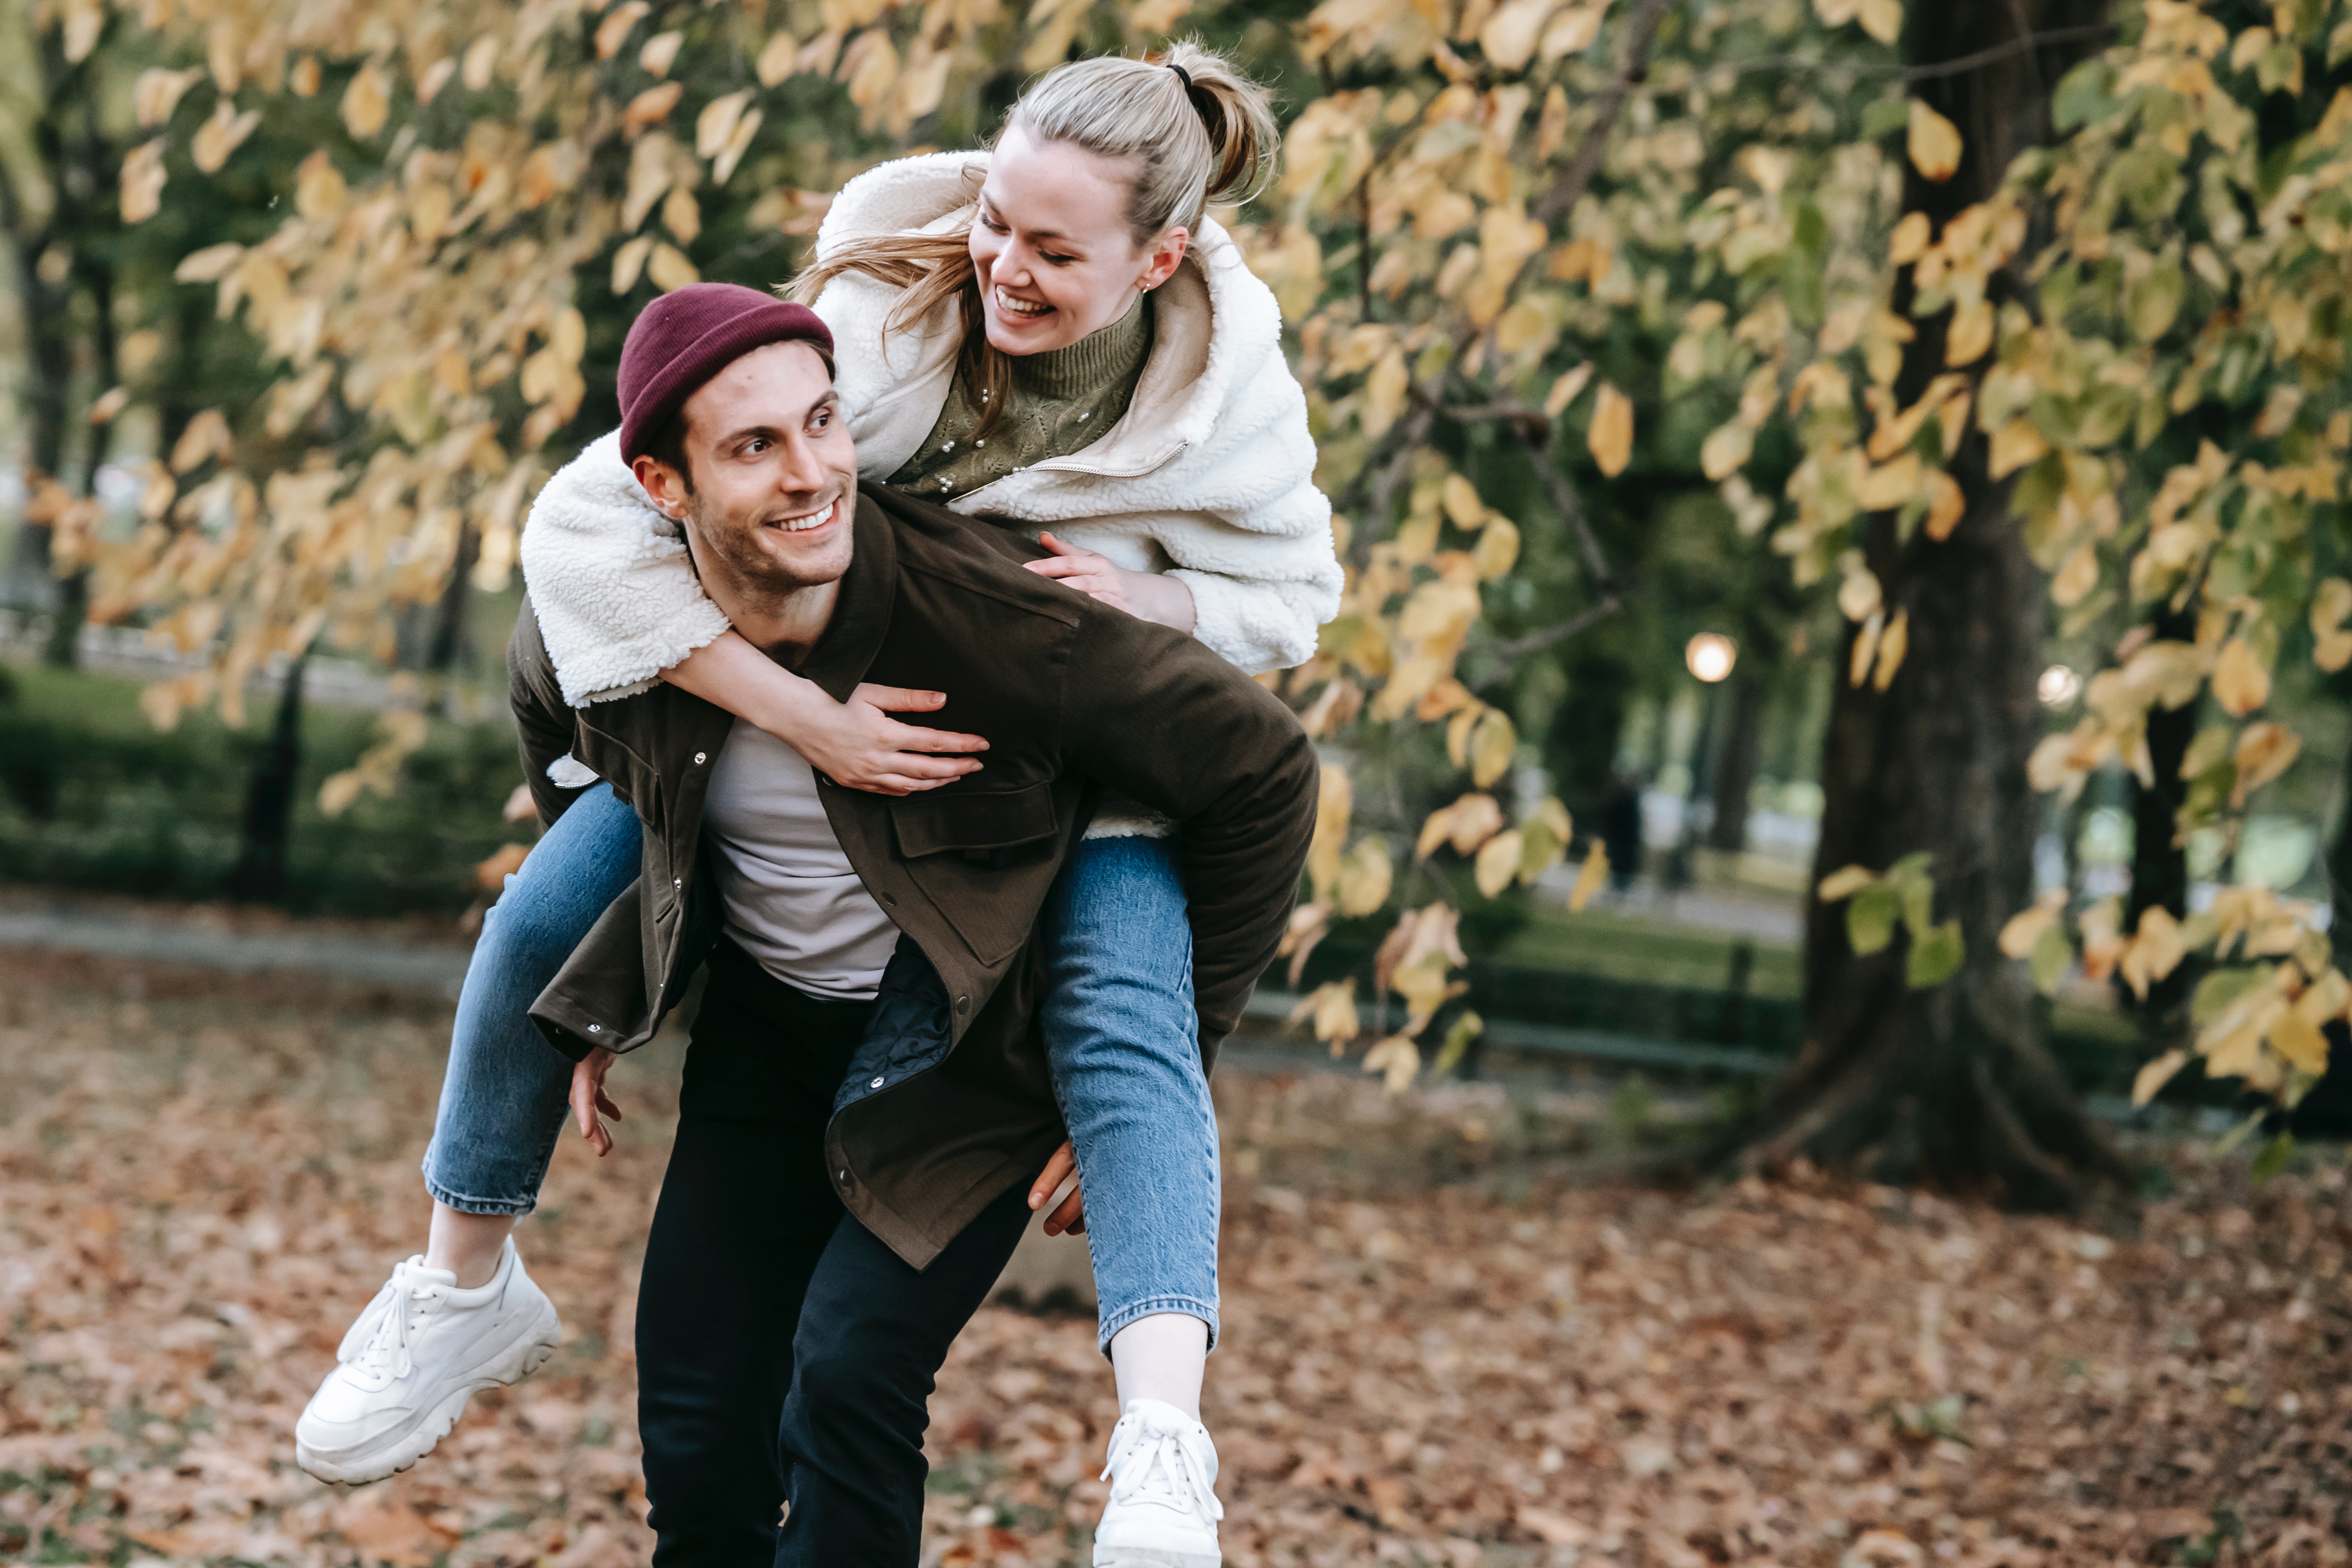 Cheerful man giving piggyback ride to smiling girlfriend in park in autumn · Free